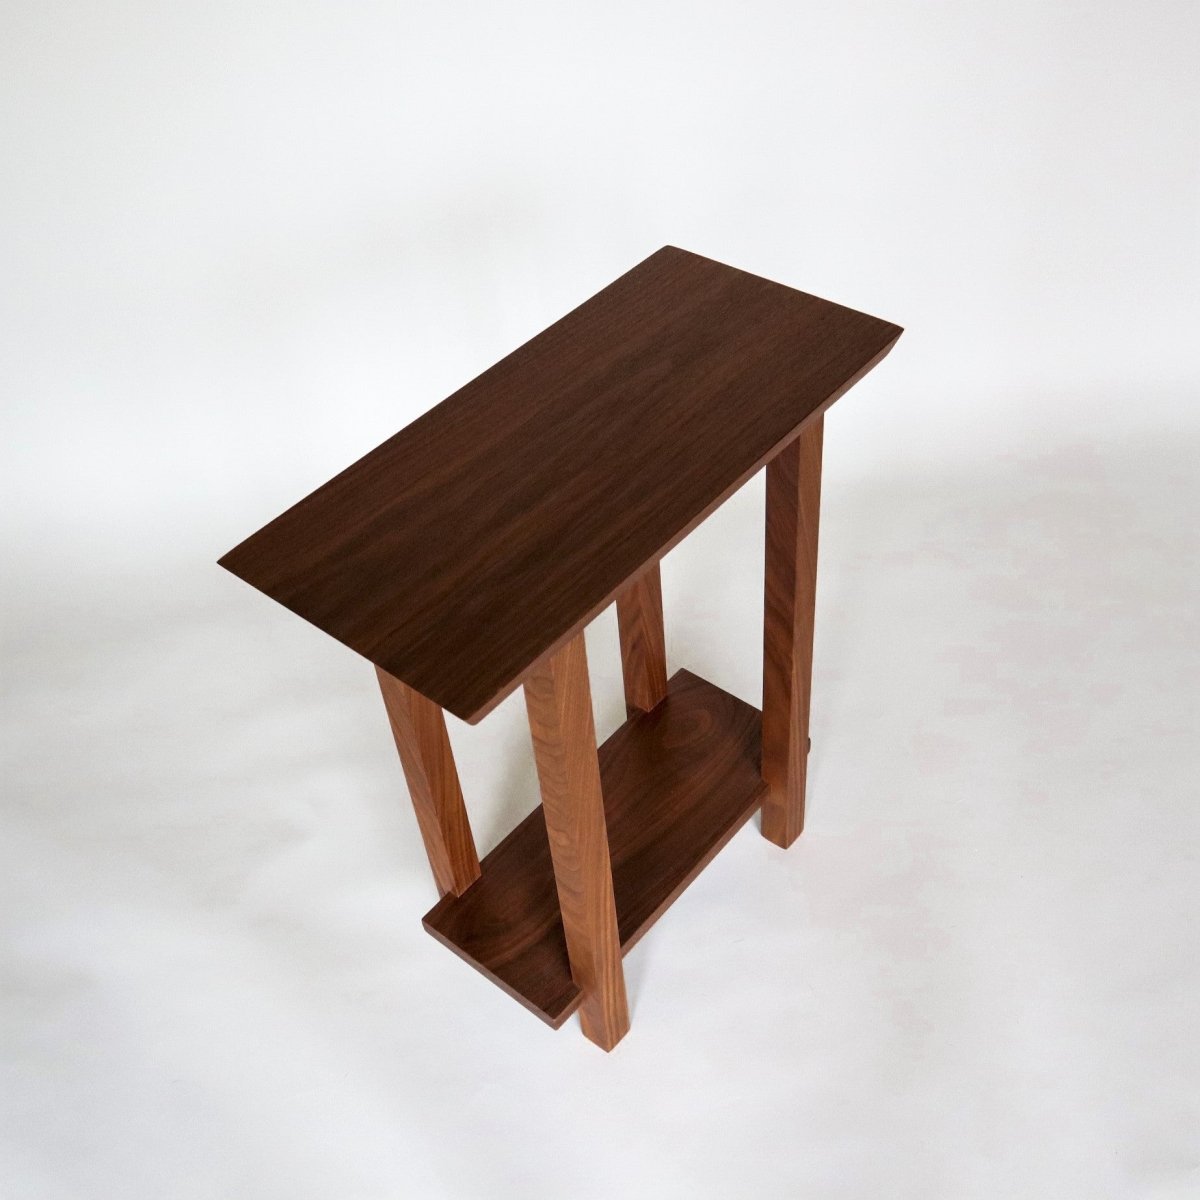 solid walnut end table for small spaces by Mokuzai Furniture